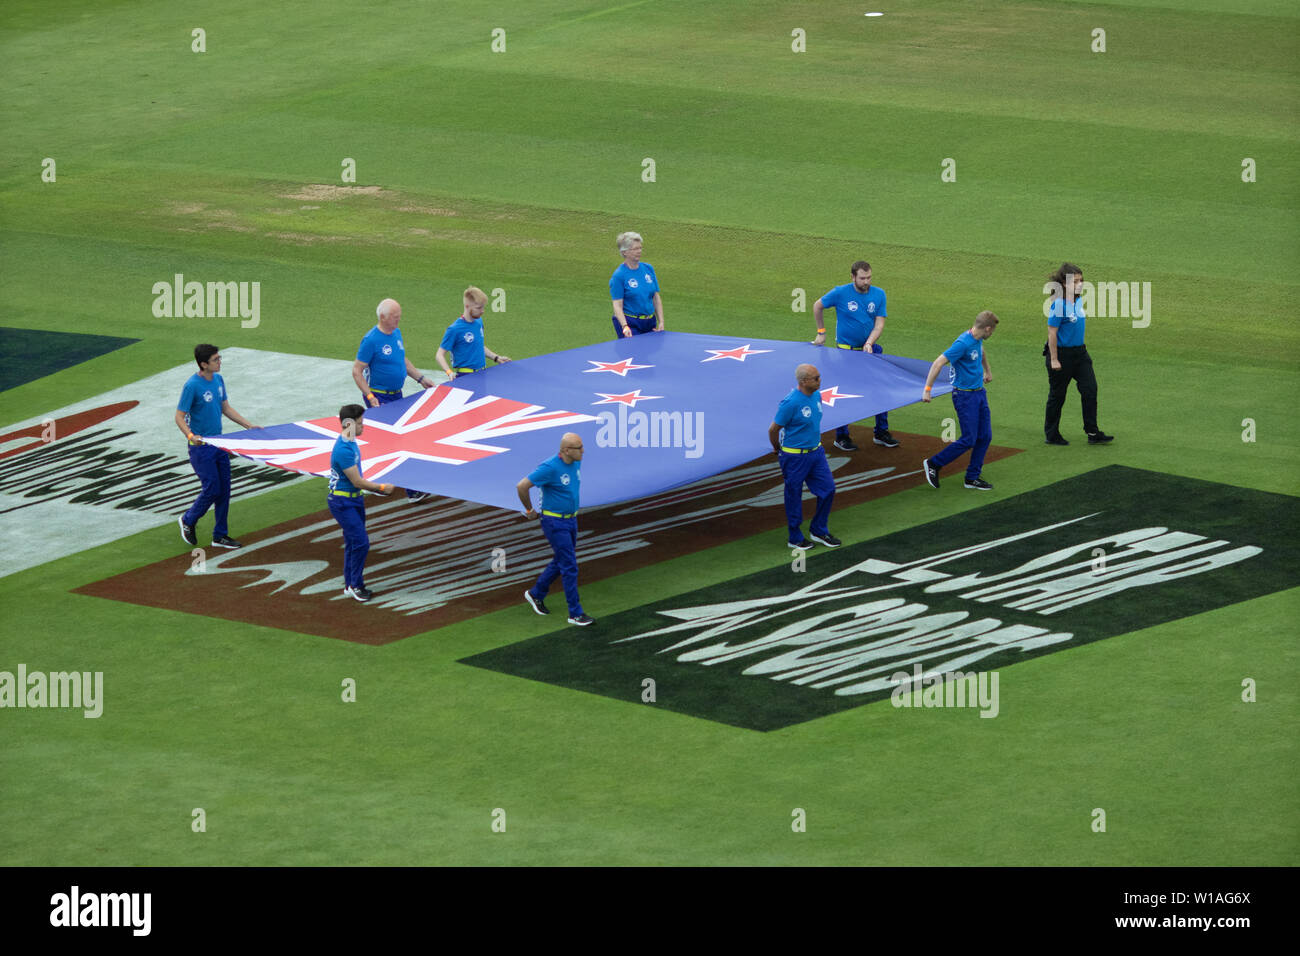 28th June 2019 - Flag bearers parading the New Zealand Flag prior to the game against Pakistan in the 2019 ICC World Cup held in England and Wales Stock Photo